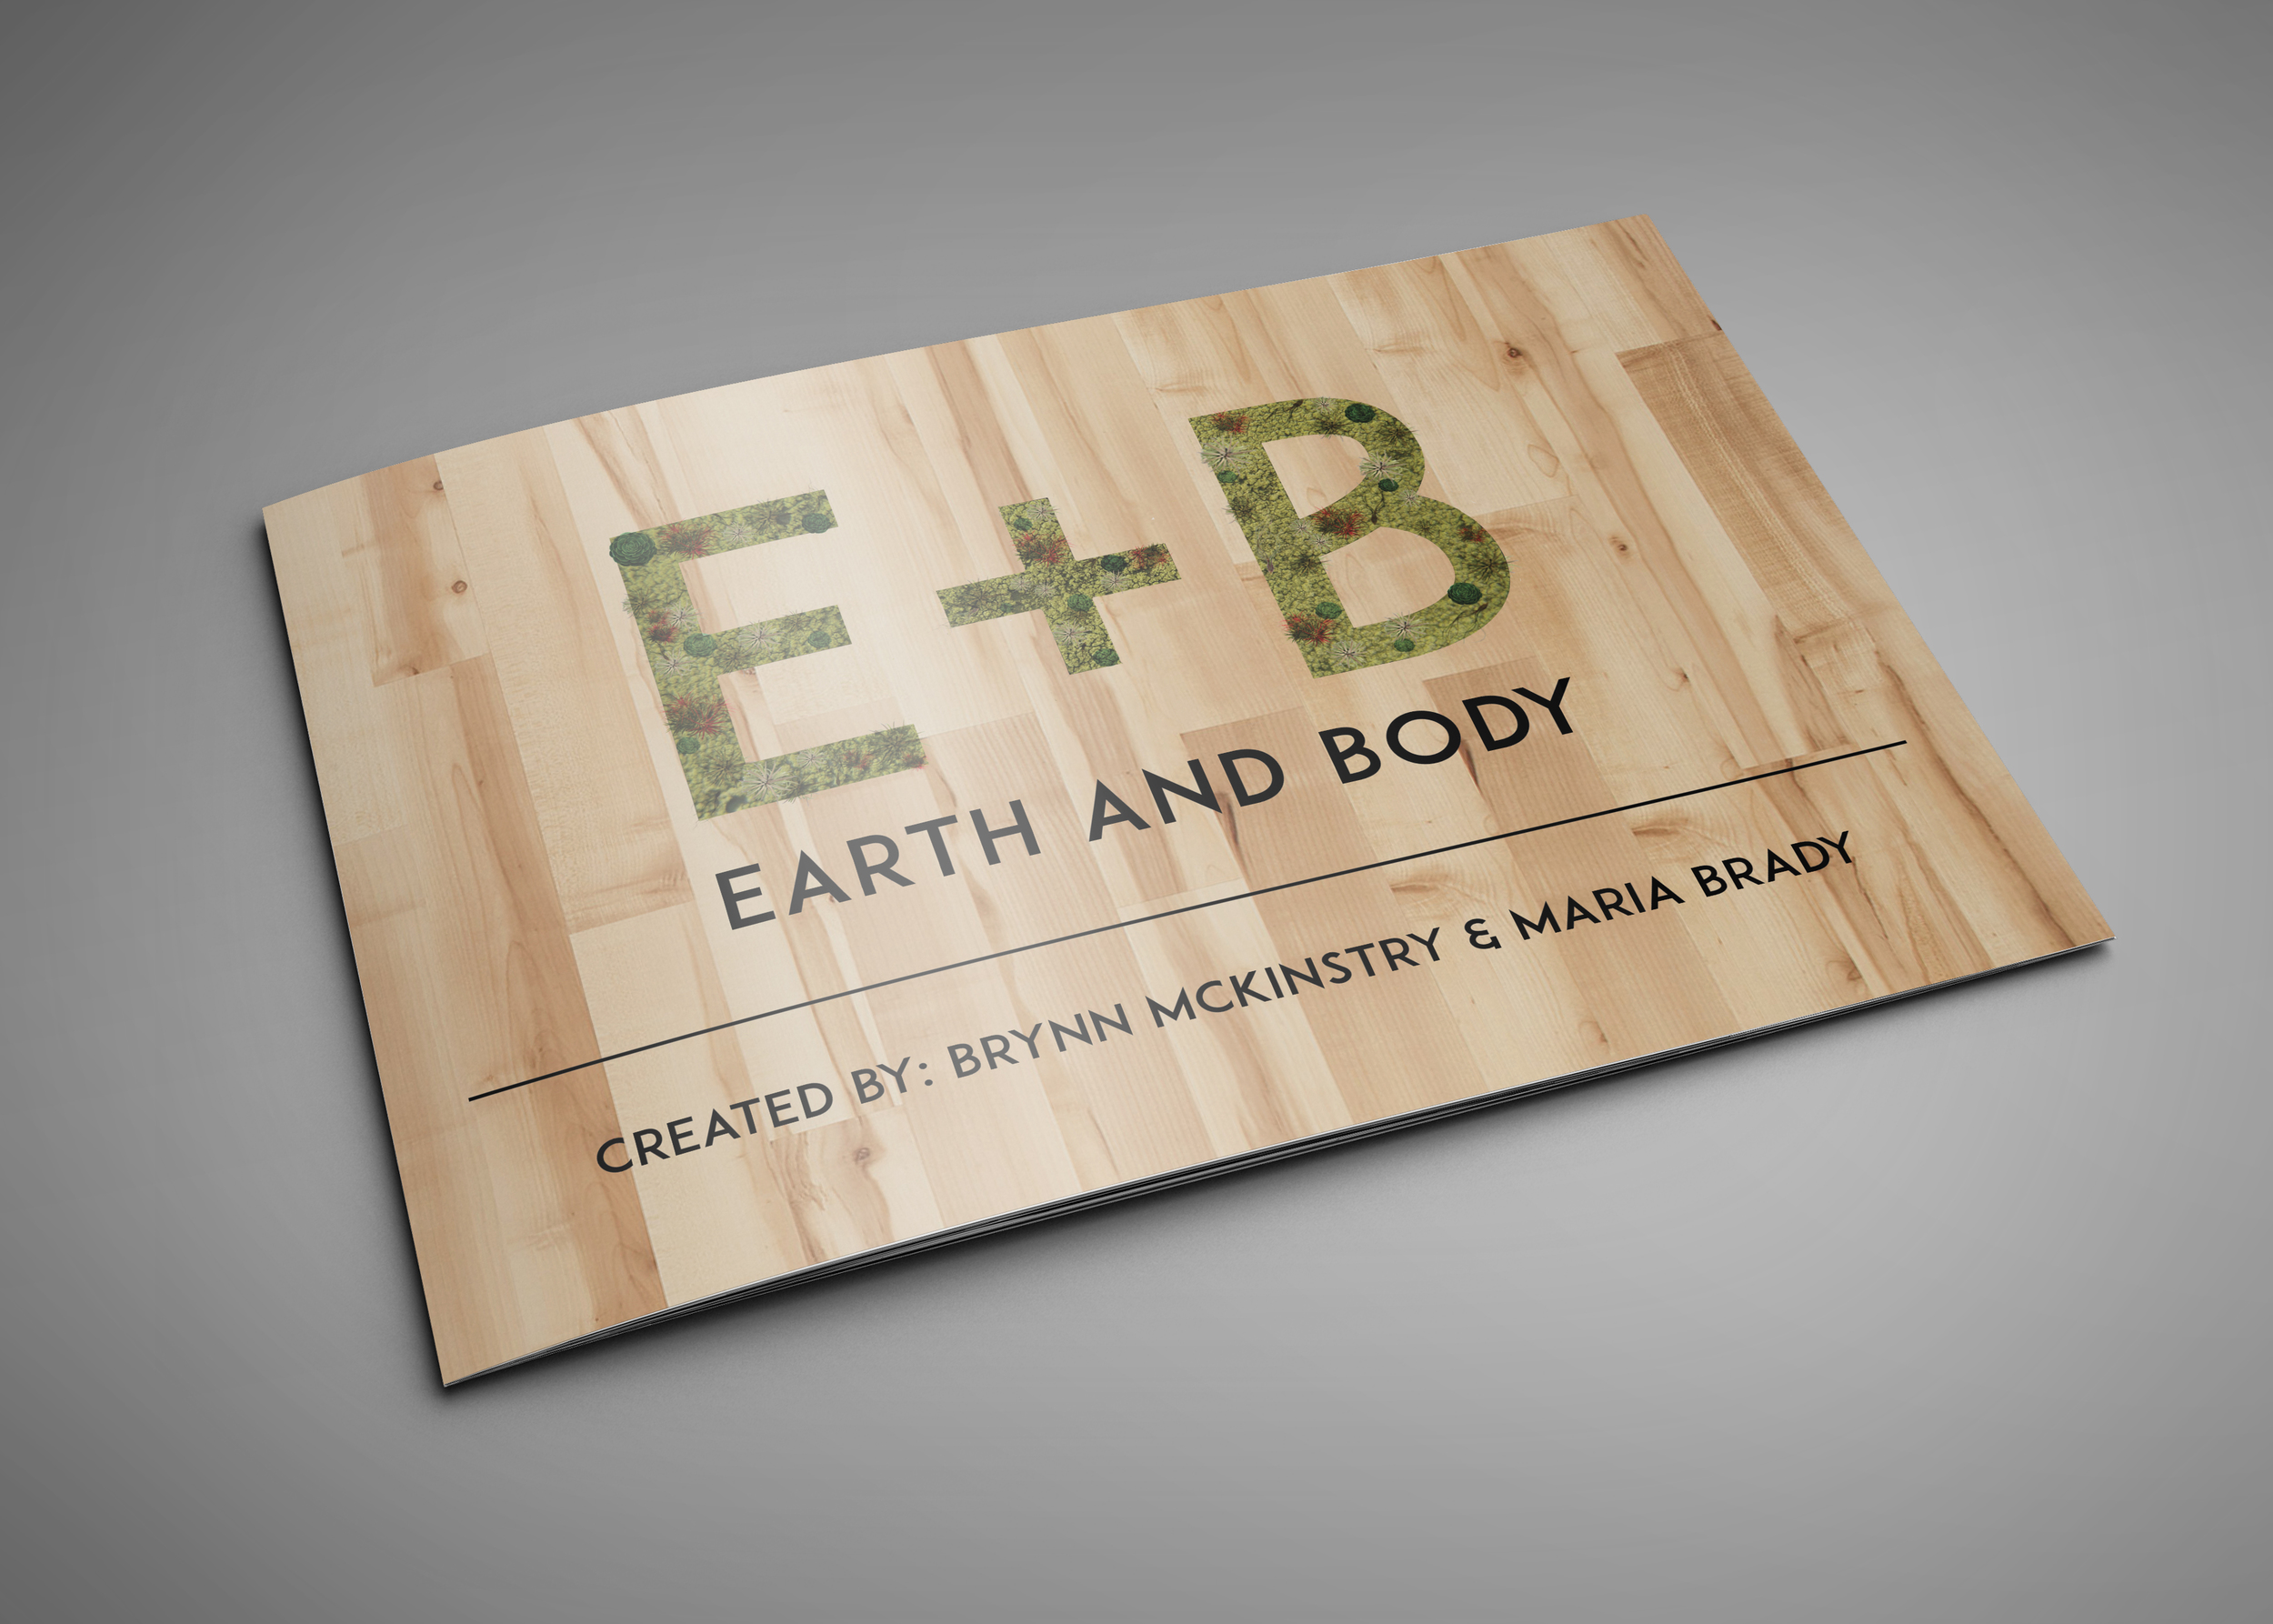  Earth + Body is a mock store located in Malibu, California created for the class Visual Communication in Fashion at the Savannah College of Art and Design. E+B is an organic lifestyle brand that strives to bring its customers together with the raw e